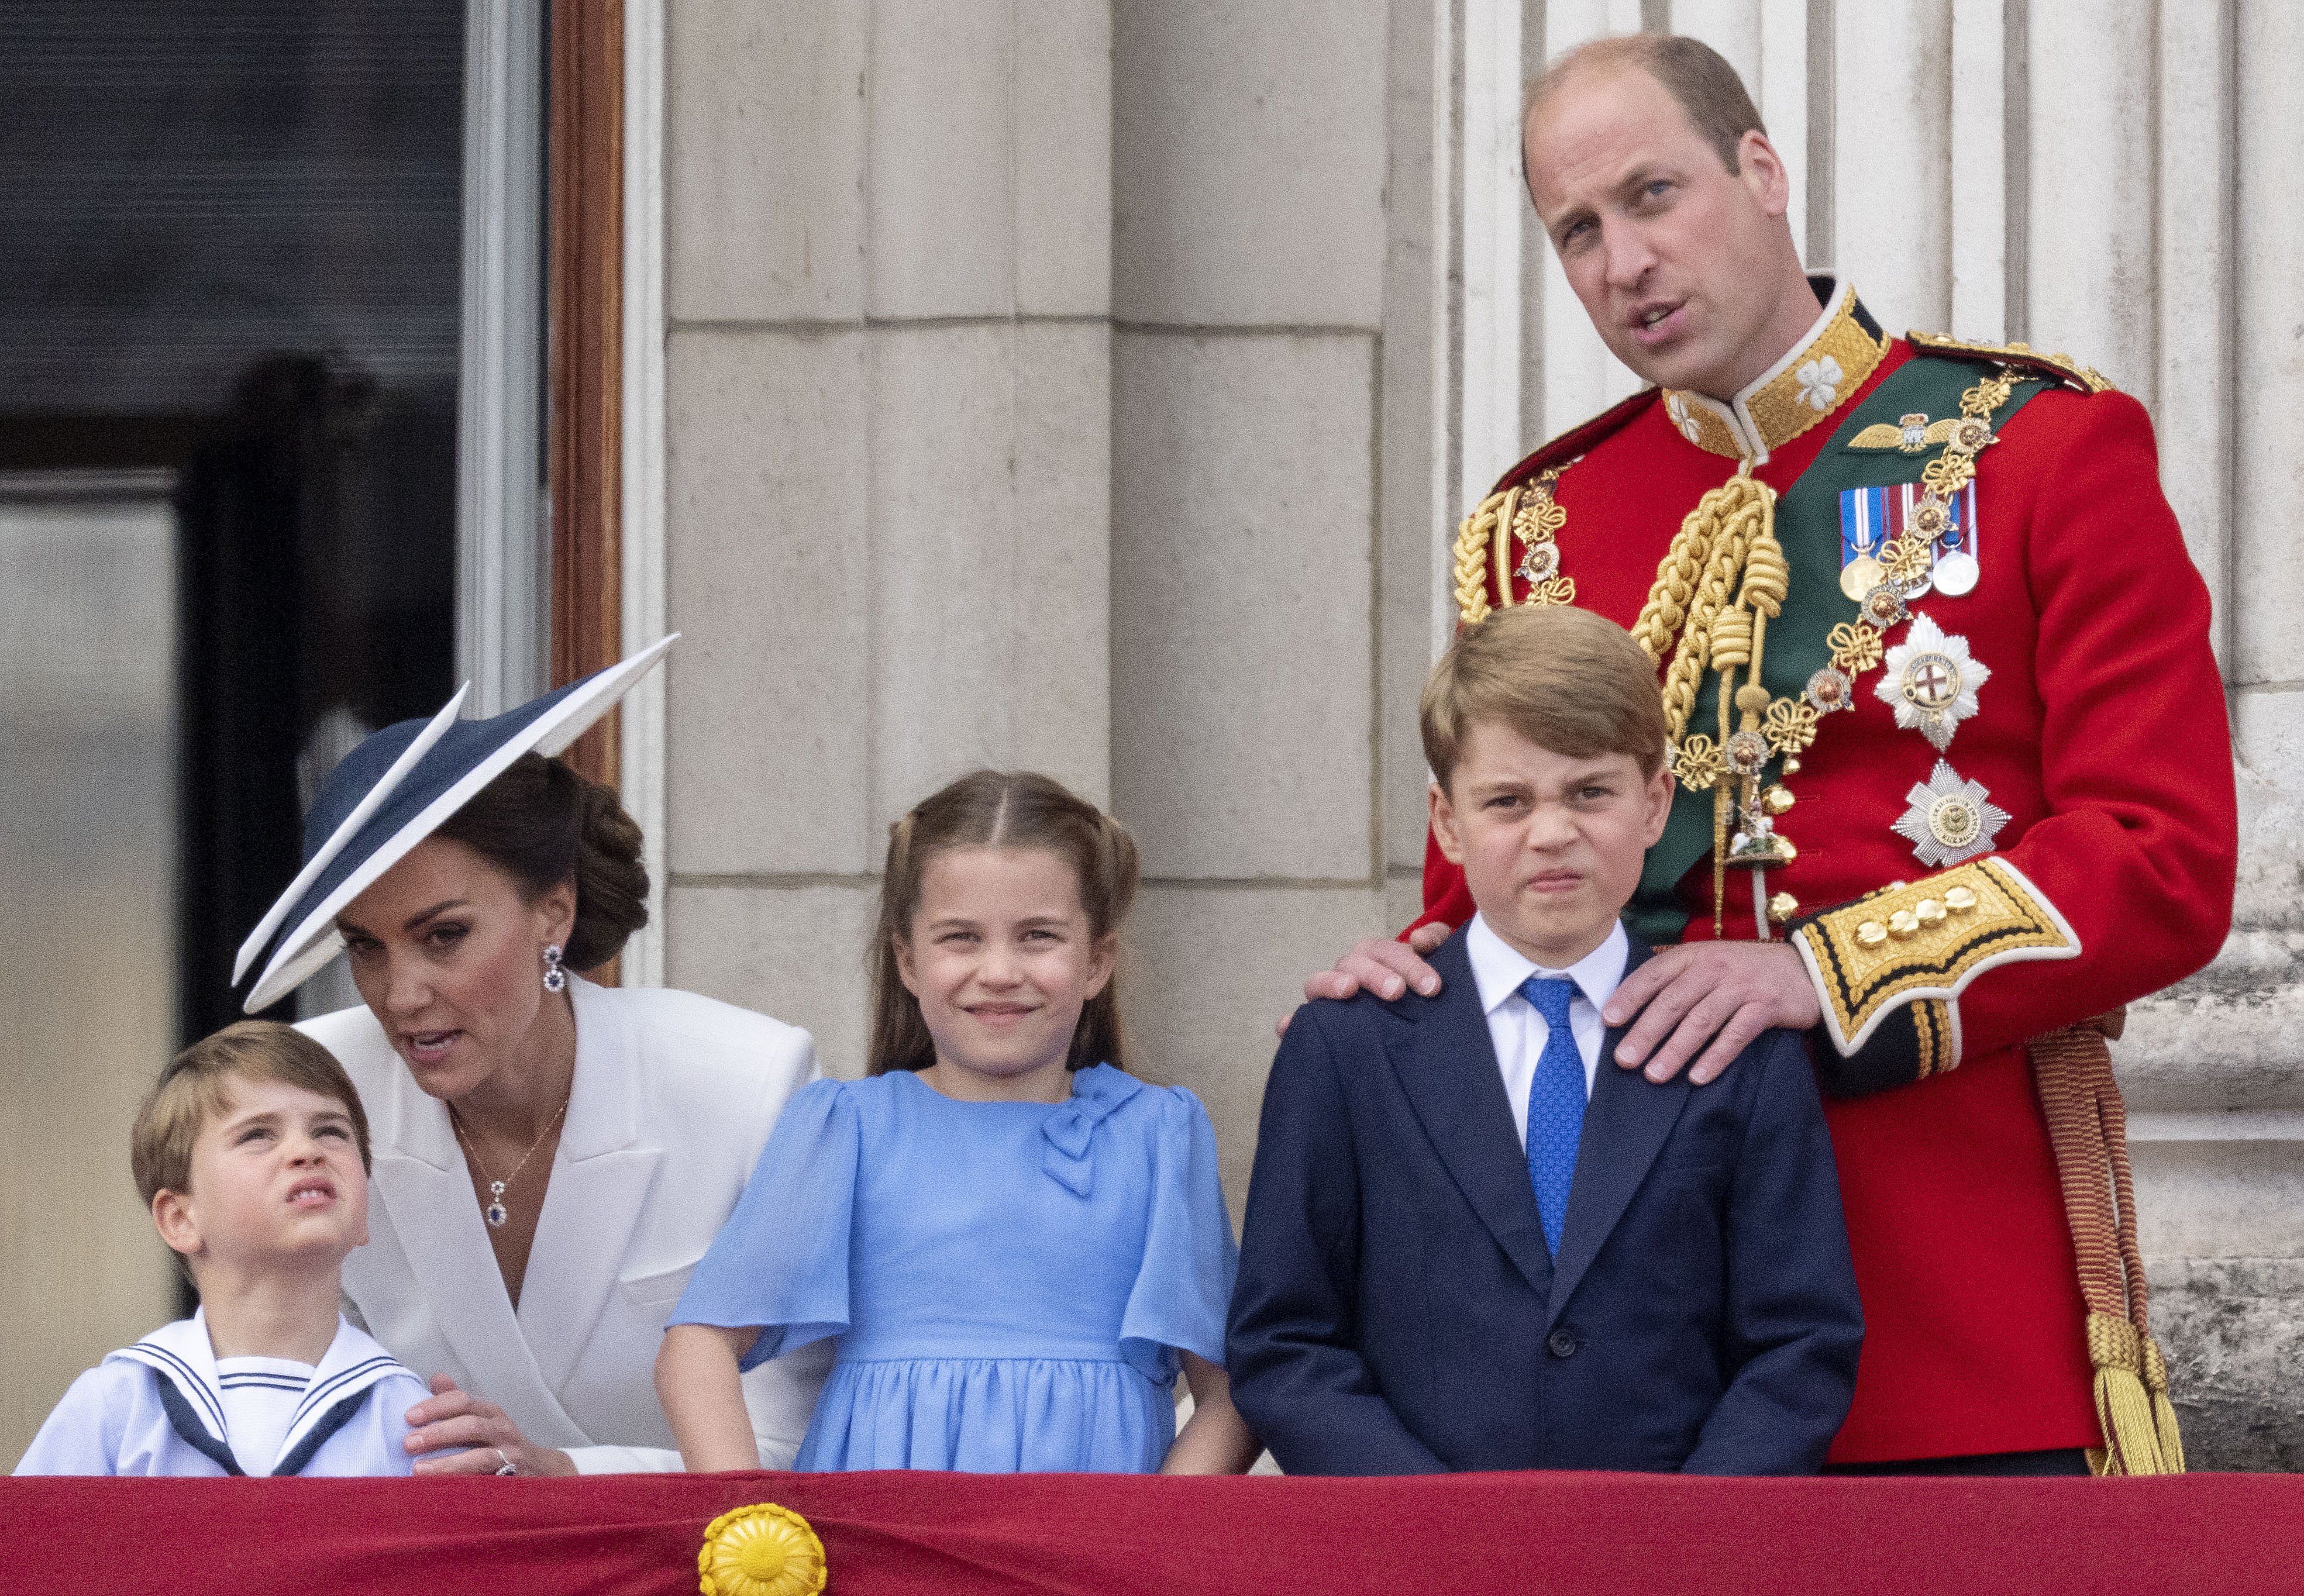 Prince William, Duke of Cambridge and Catherine, Duchess of Cambridge with Prince Louis of Cambridge, Princess Charlotte of Cambridge and Prince George of Cambridge during Trooping the Colour on June 2, 2022 in London, England | Source: Getty Images